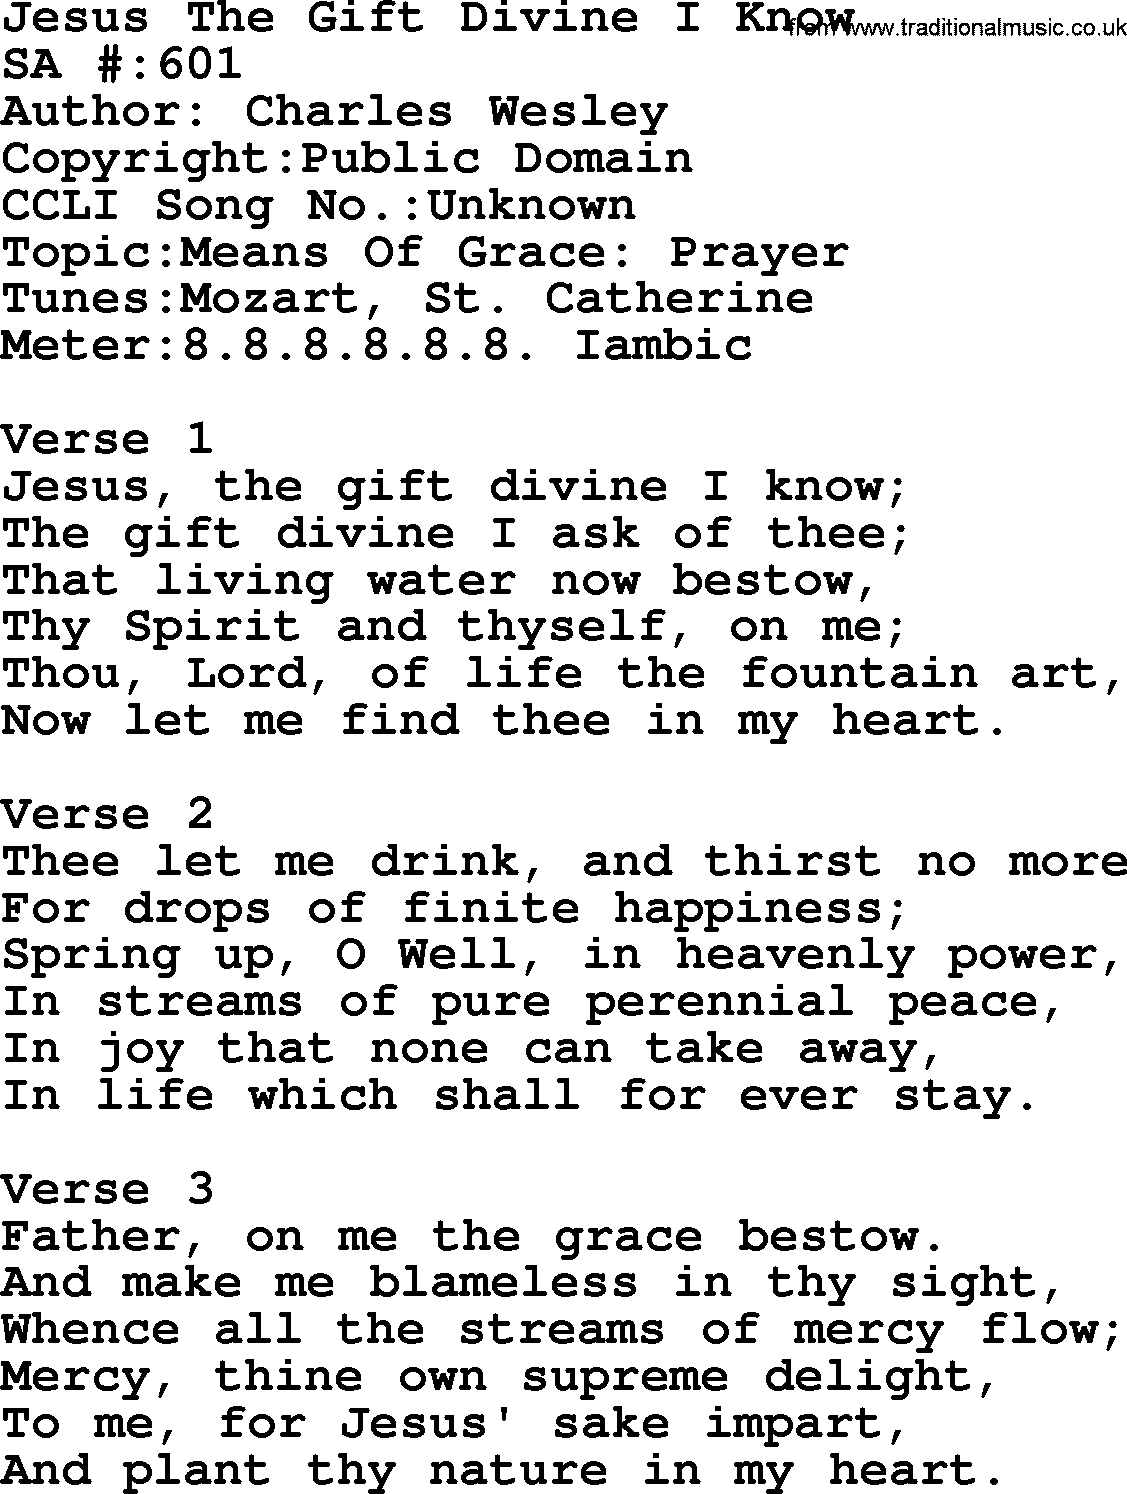 Salvation Army Hymnal, title: Jesus The Gift Divine I Know, with lyrics and PDF,